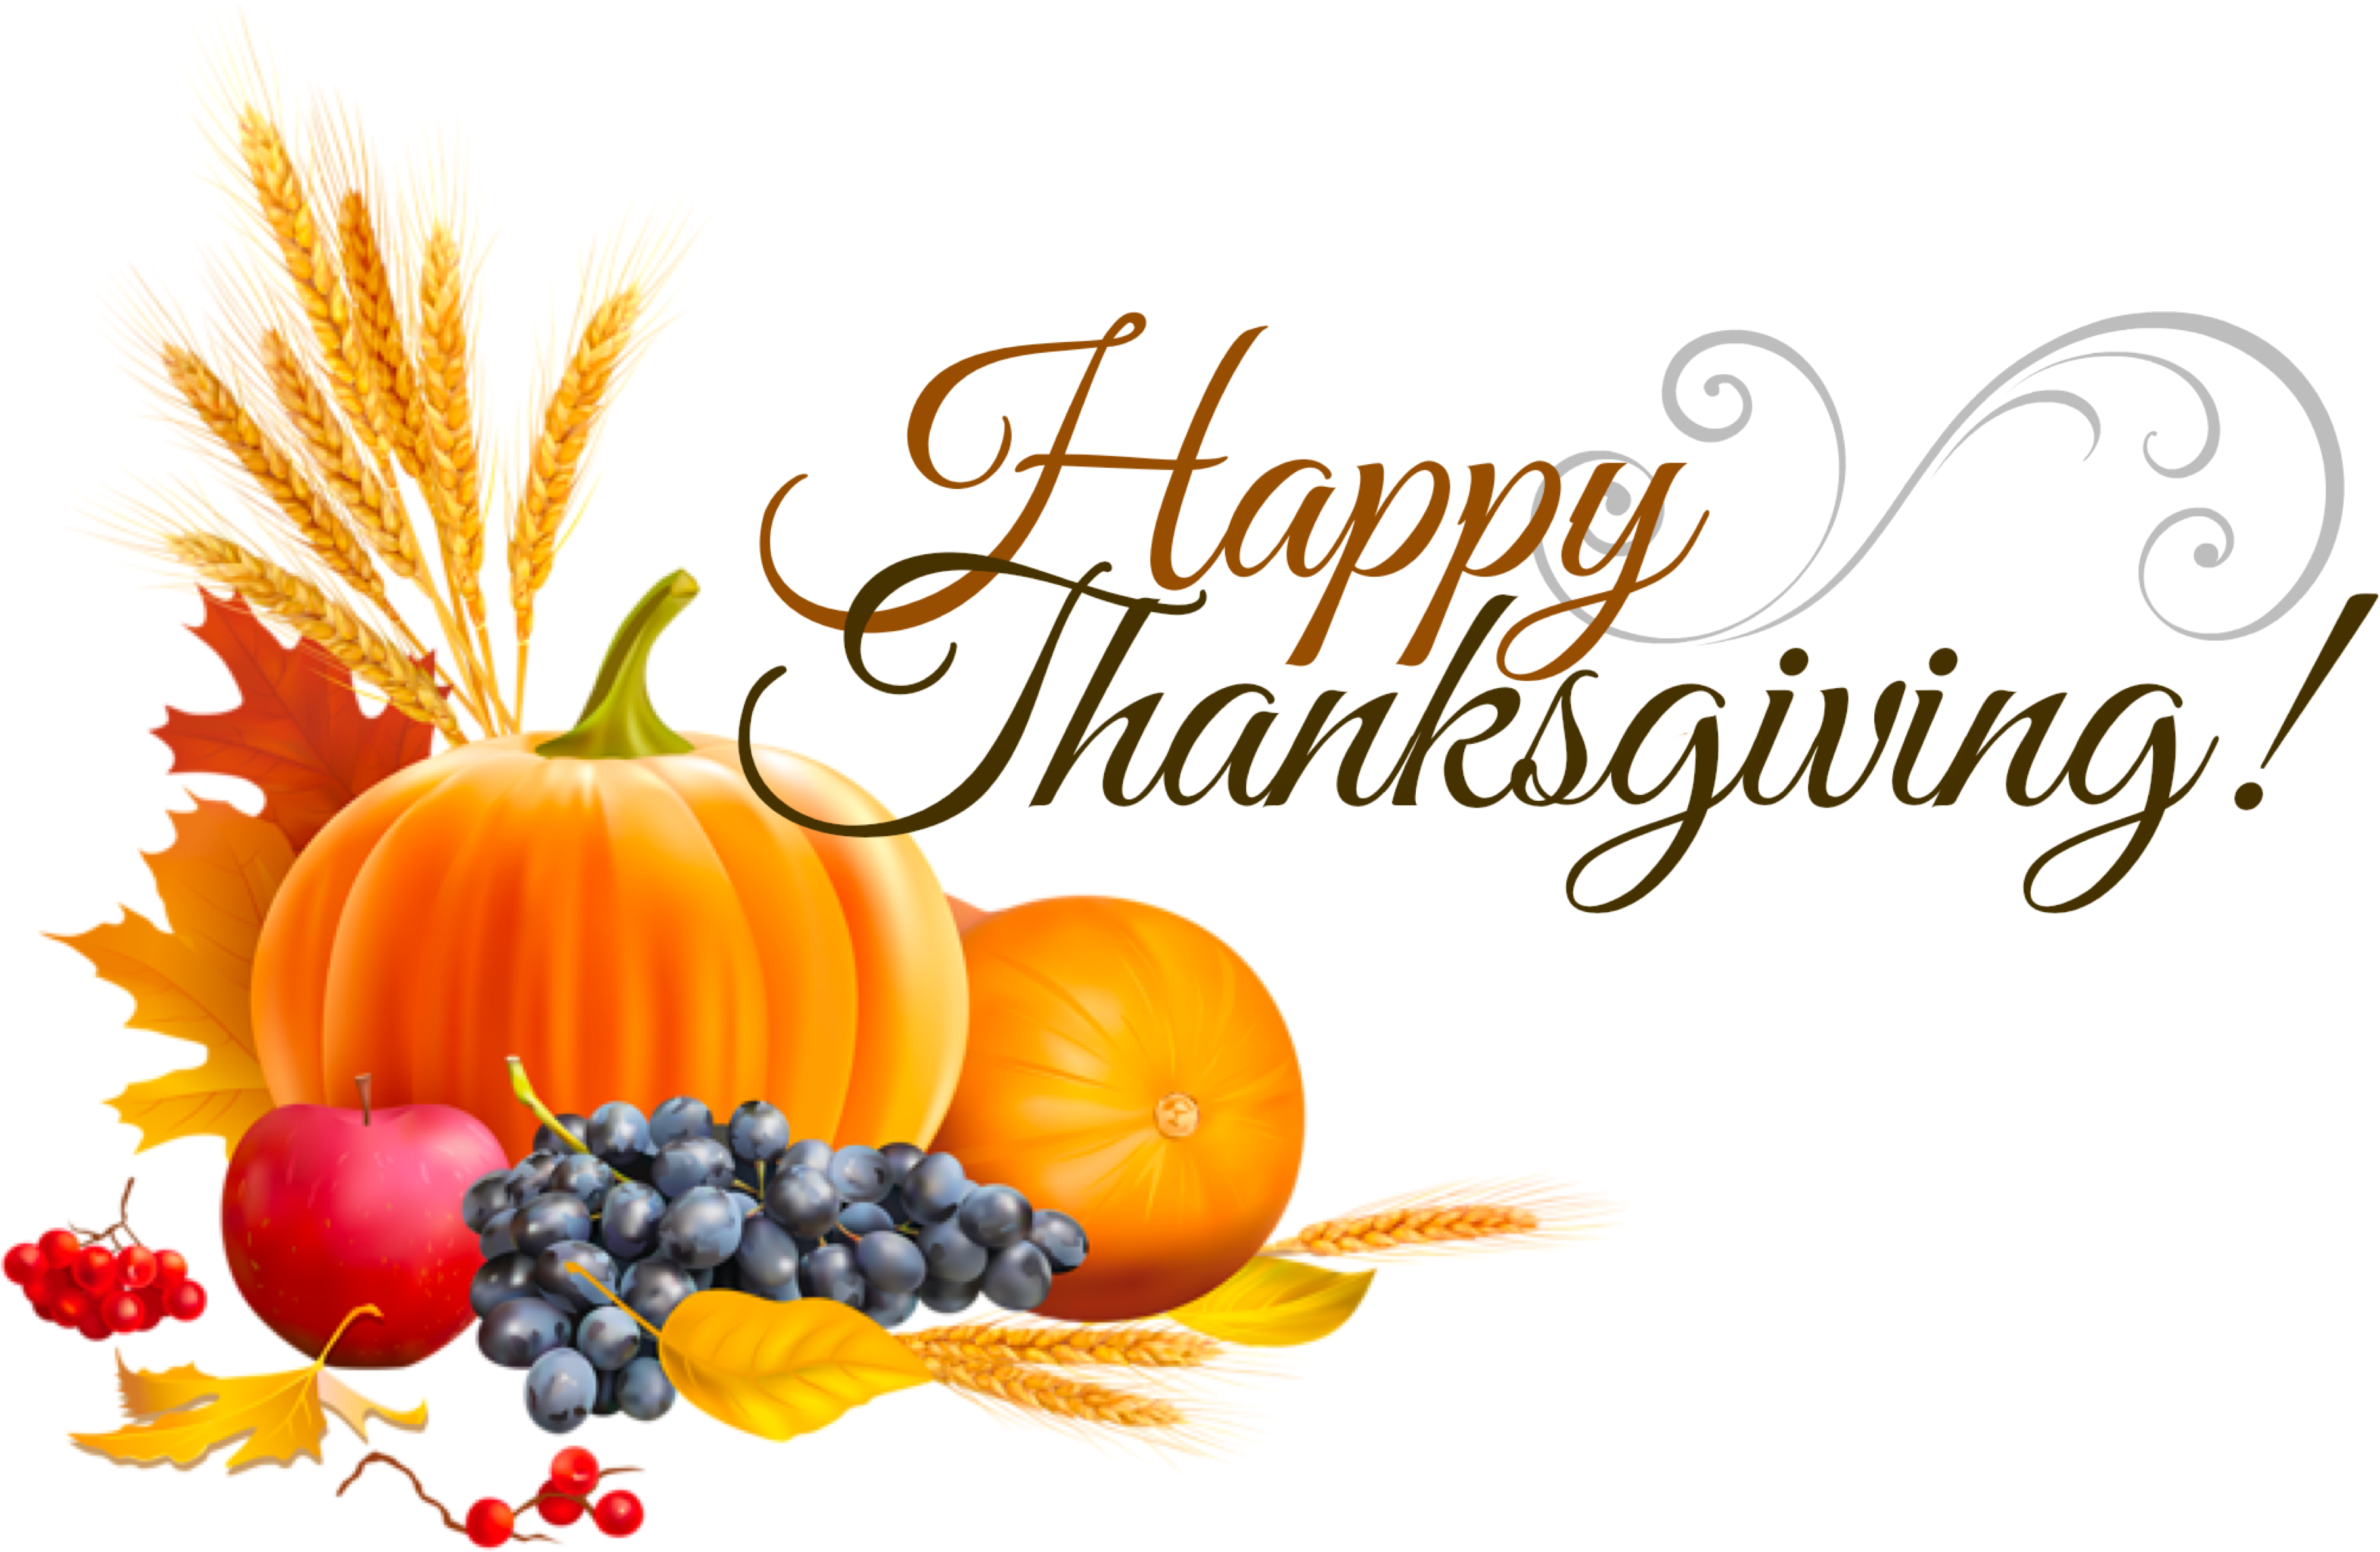 Thanksgiving Message 2019-Mobile.png__PID:07620ddf-03cf-4f62-9564-c56014dacf5c